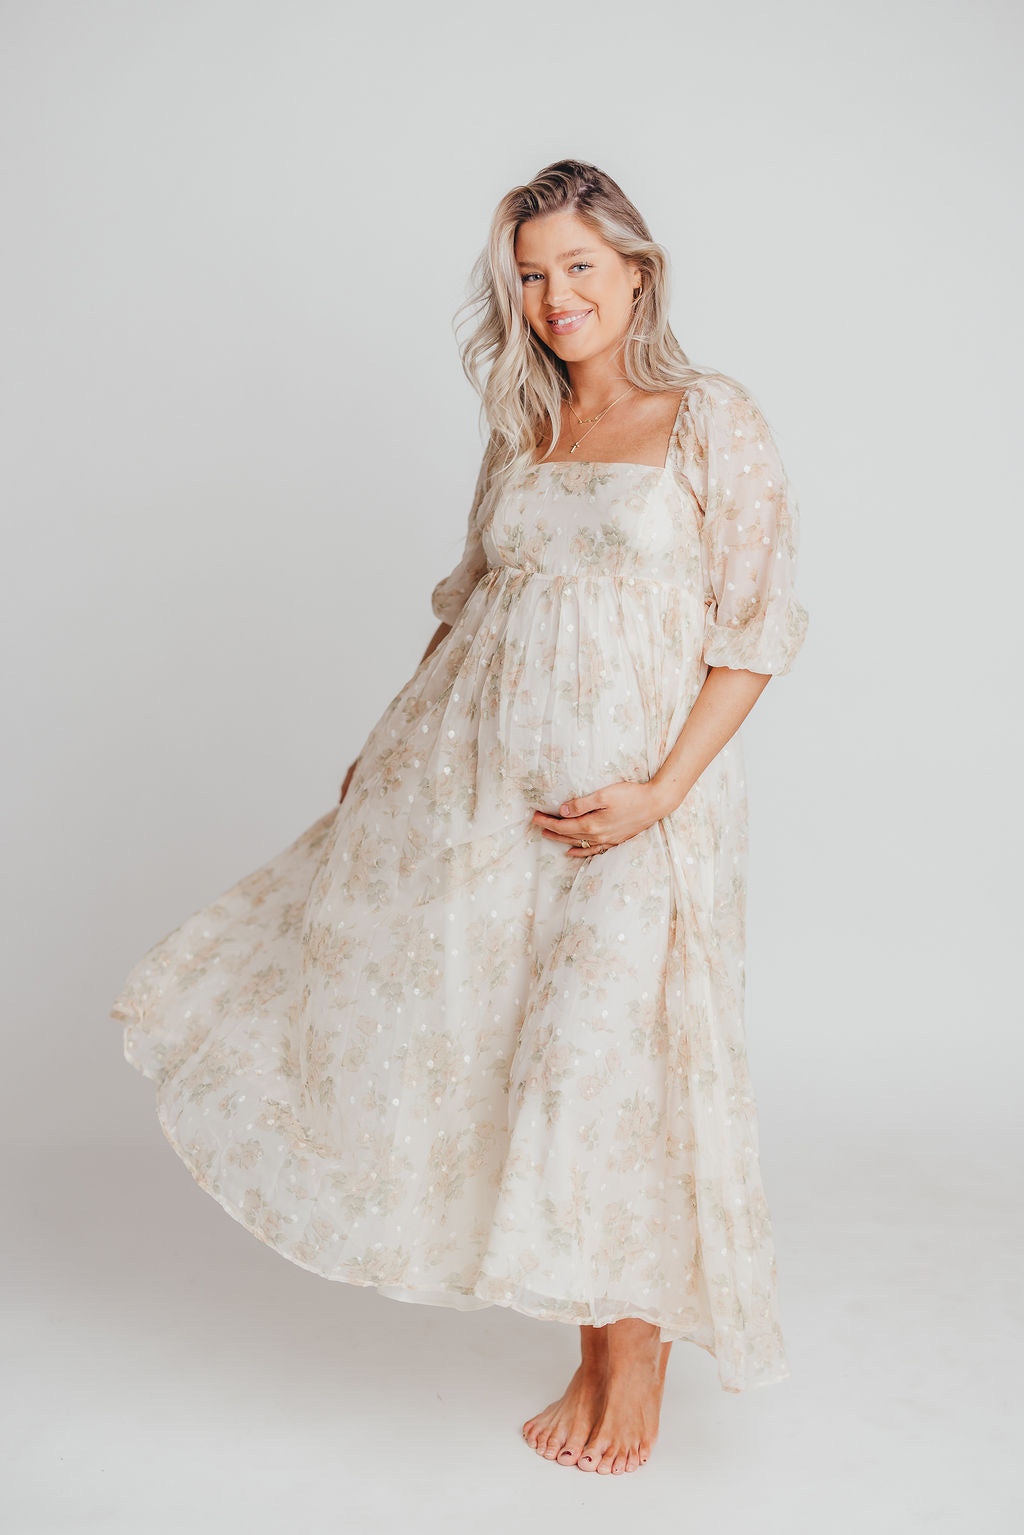 *New* Mona Maxi Dress with Smocking in Cream Floral - Bump Friendly & Inclusive Sizing (S-3XL)